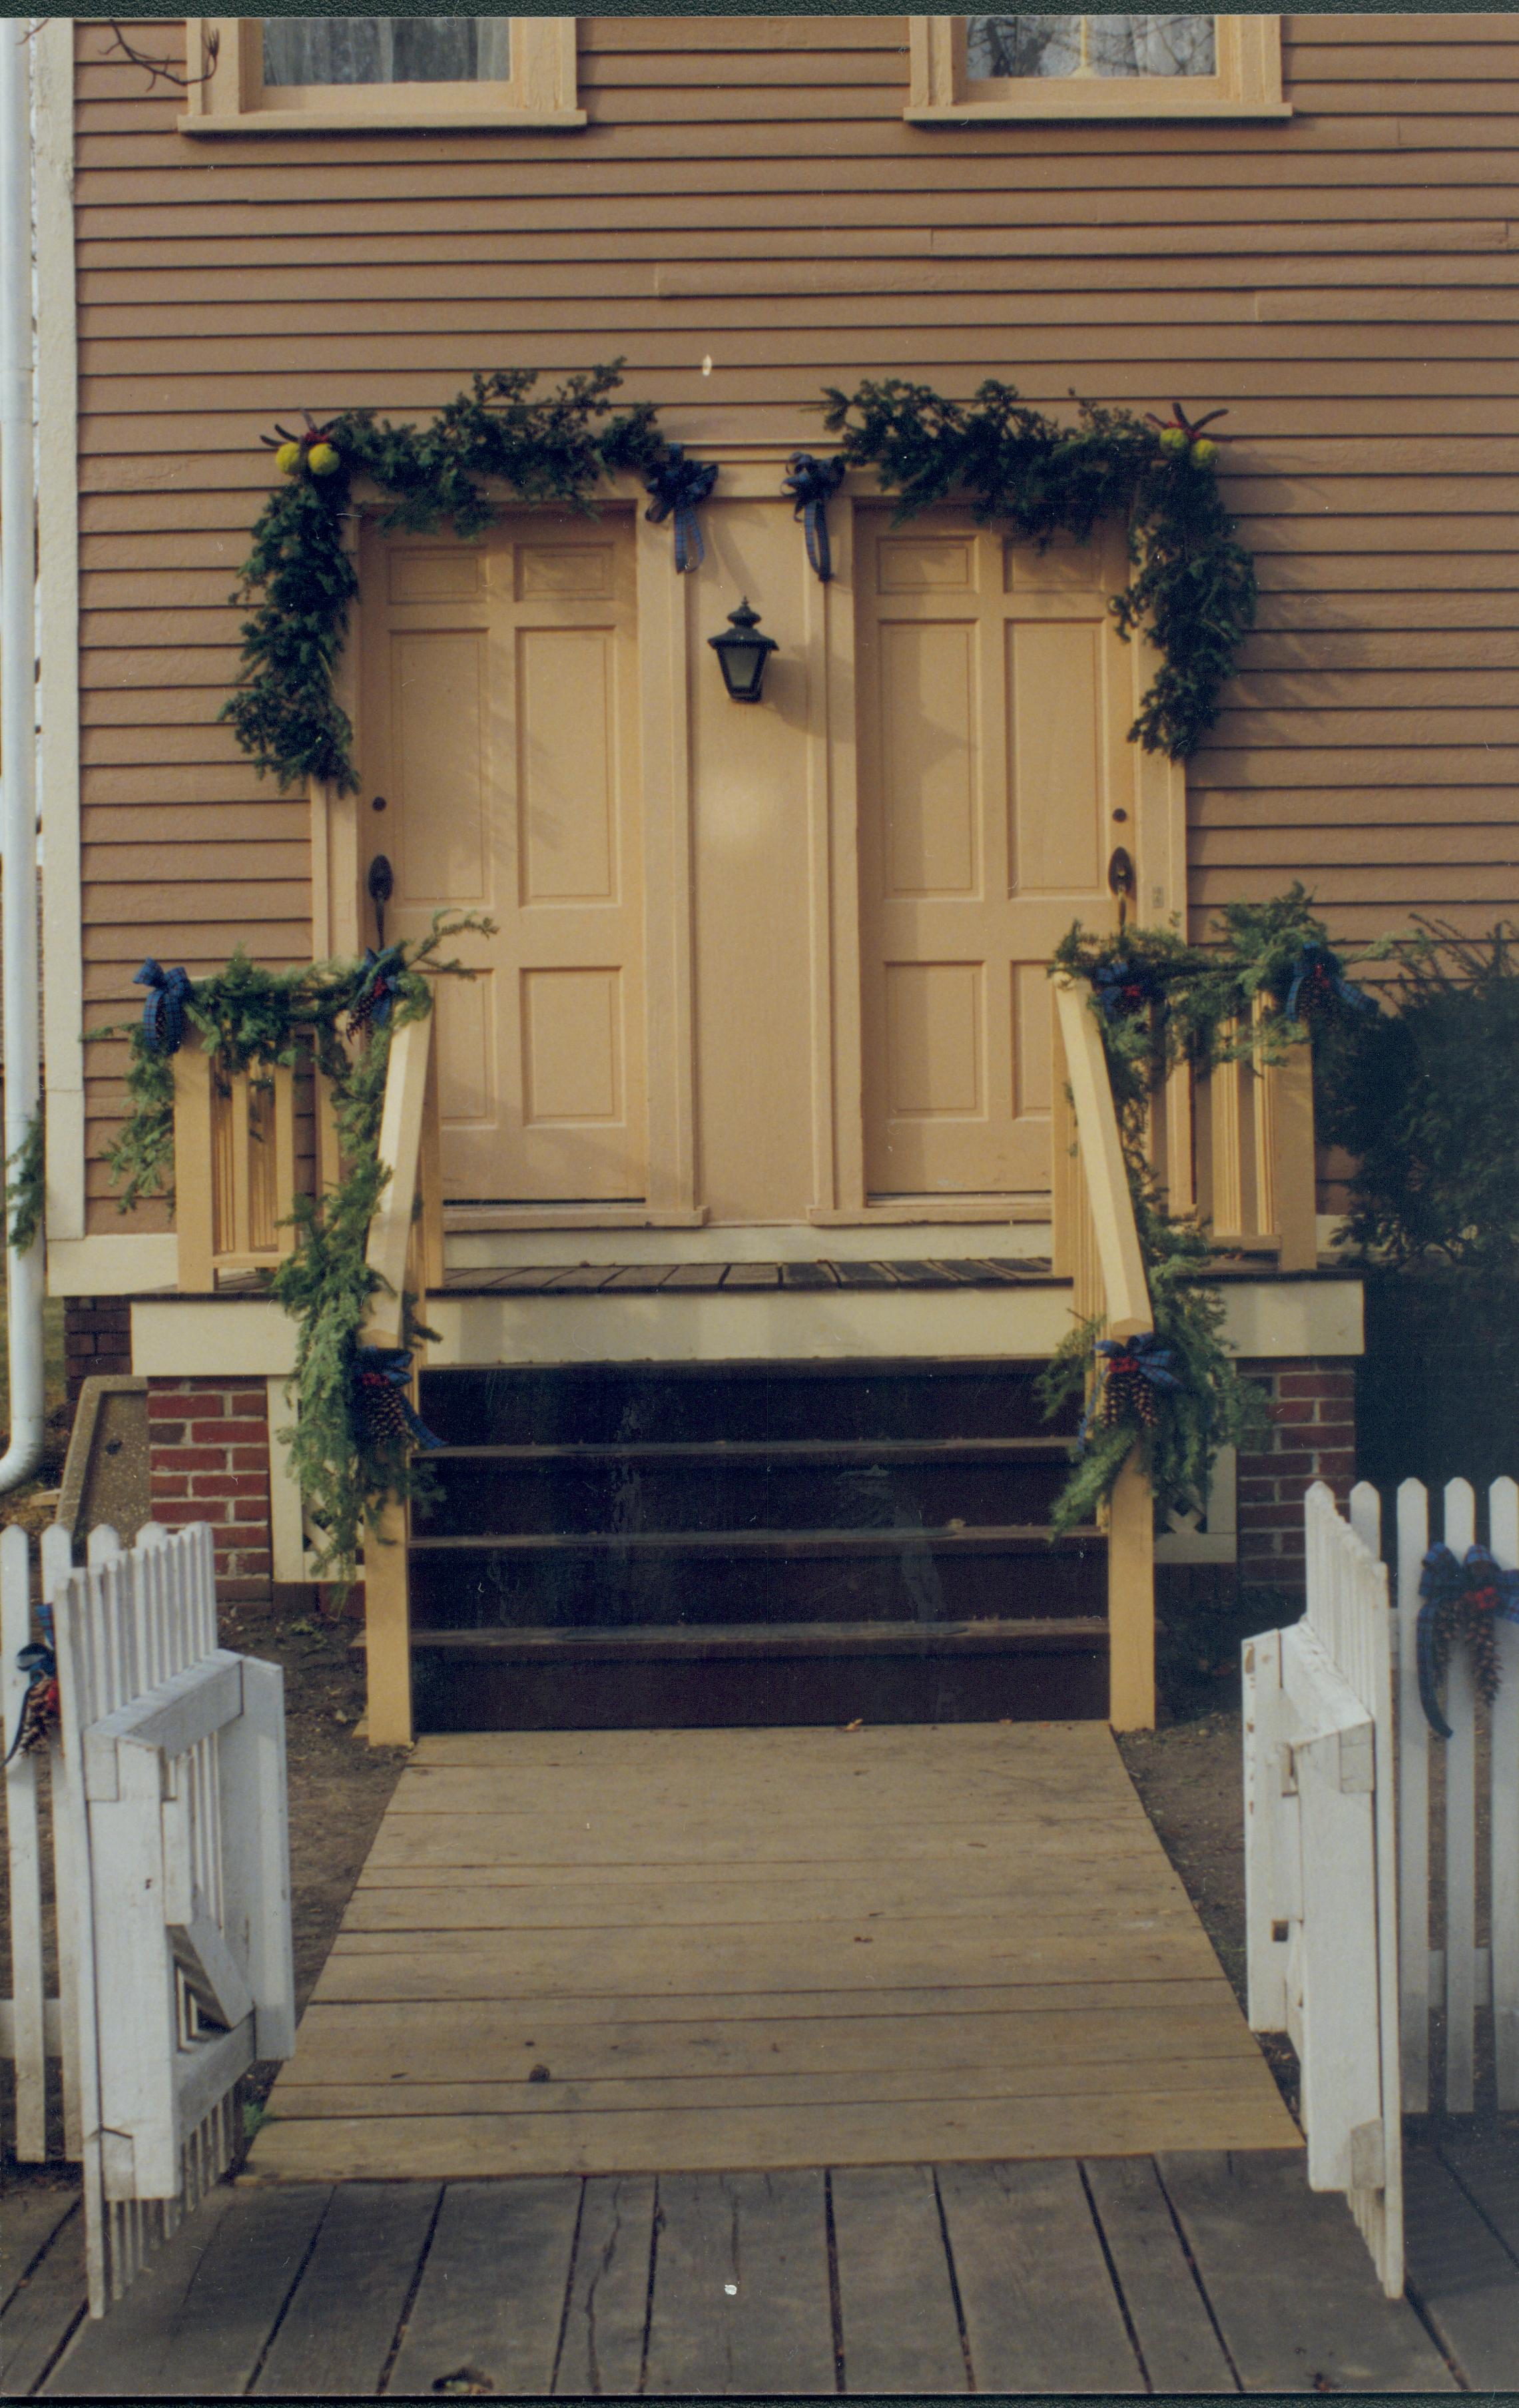 Lincoln Home NHS- Christmas in Lincoln Neighborhood Looking west, Christmas decor on Miller house porch and door. Christmas, neighborhood, door, decor, garland, Miller